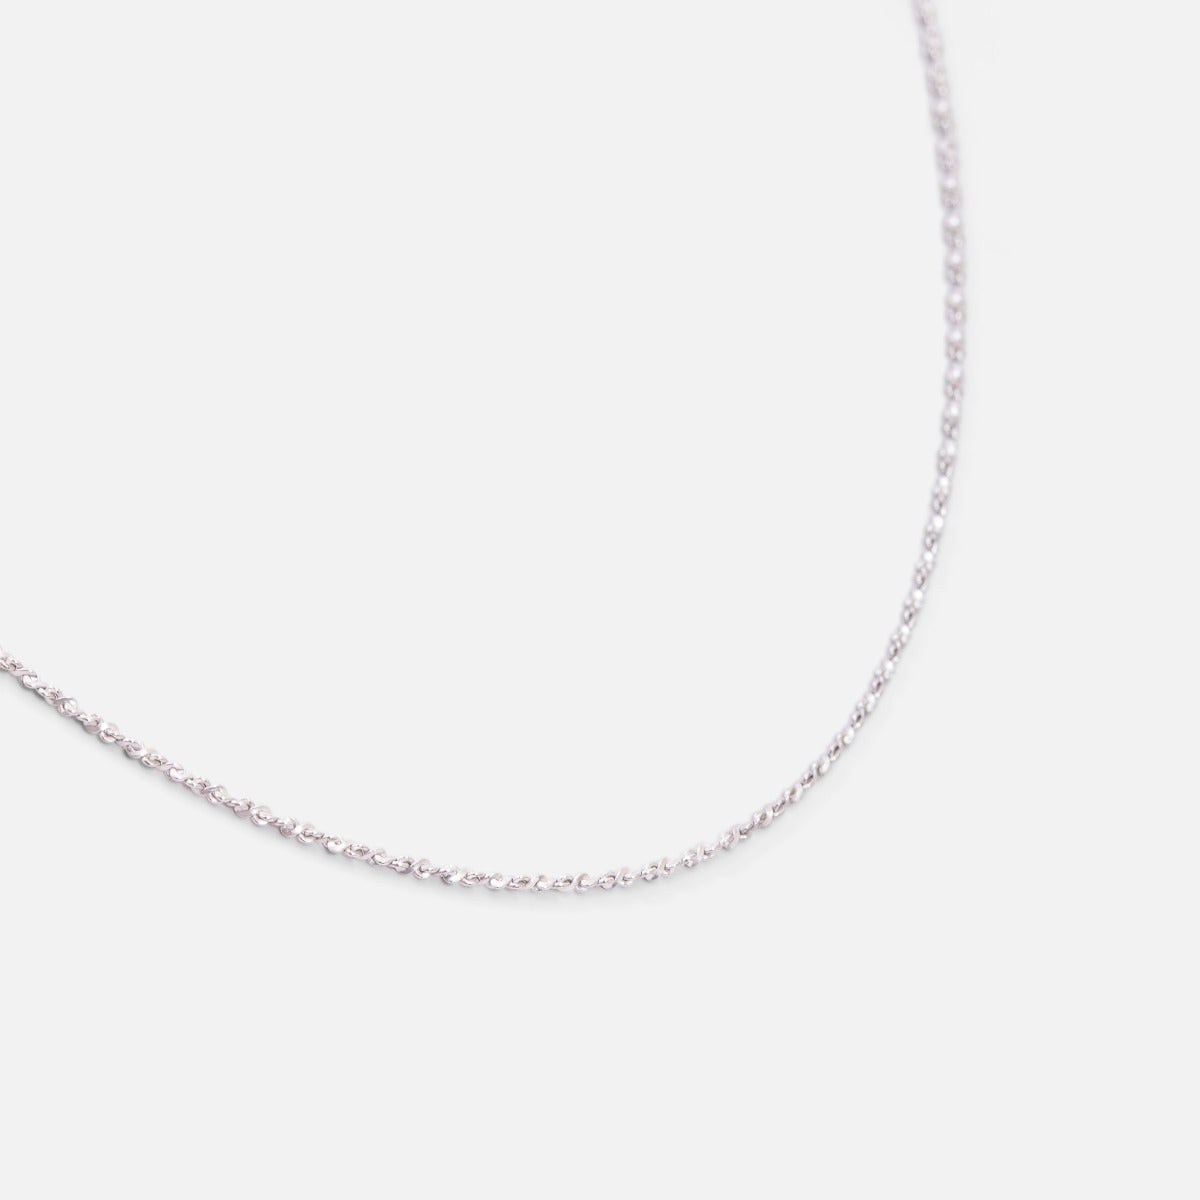 Sterling silver chain 18 inches with intertwined mesh